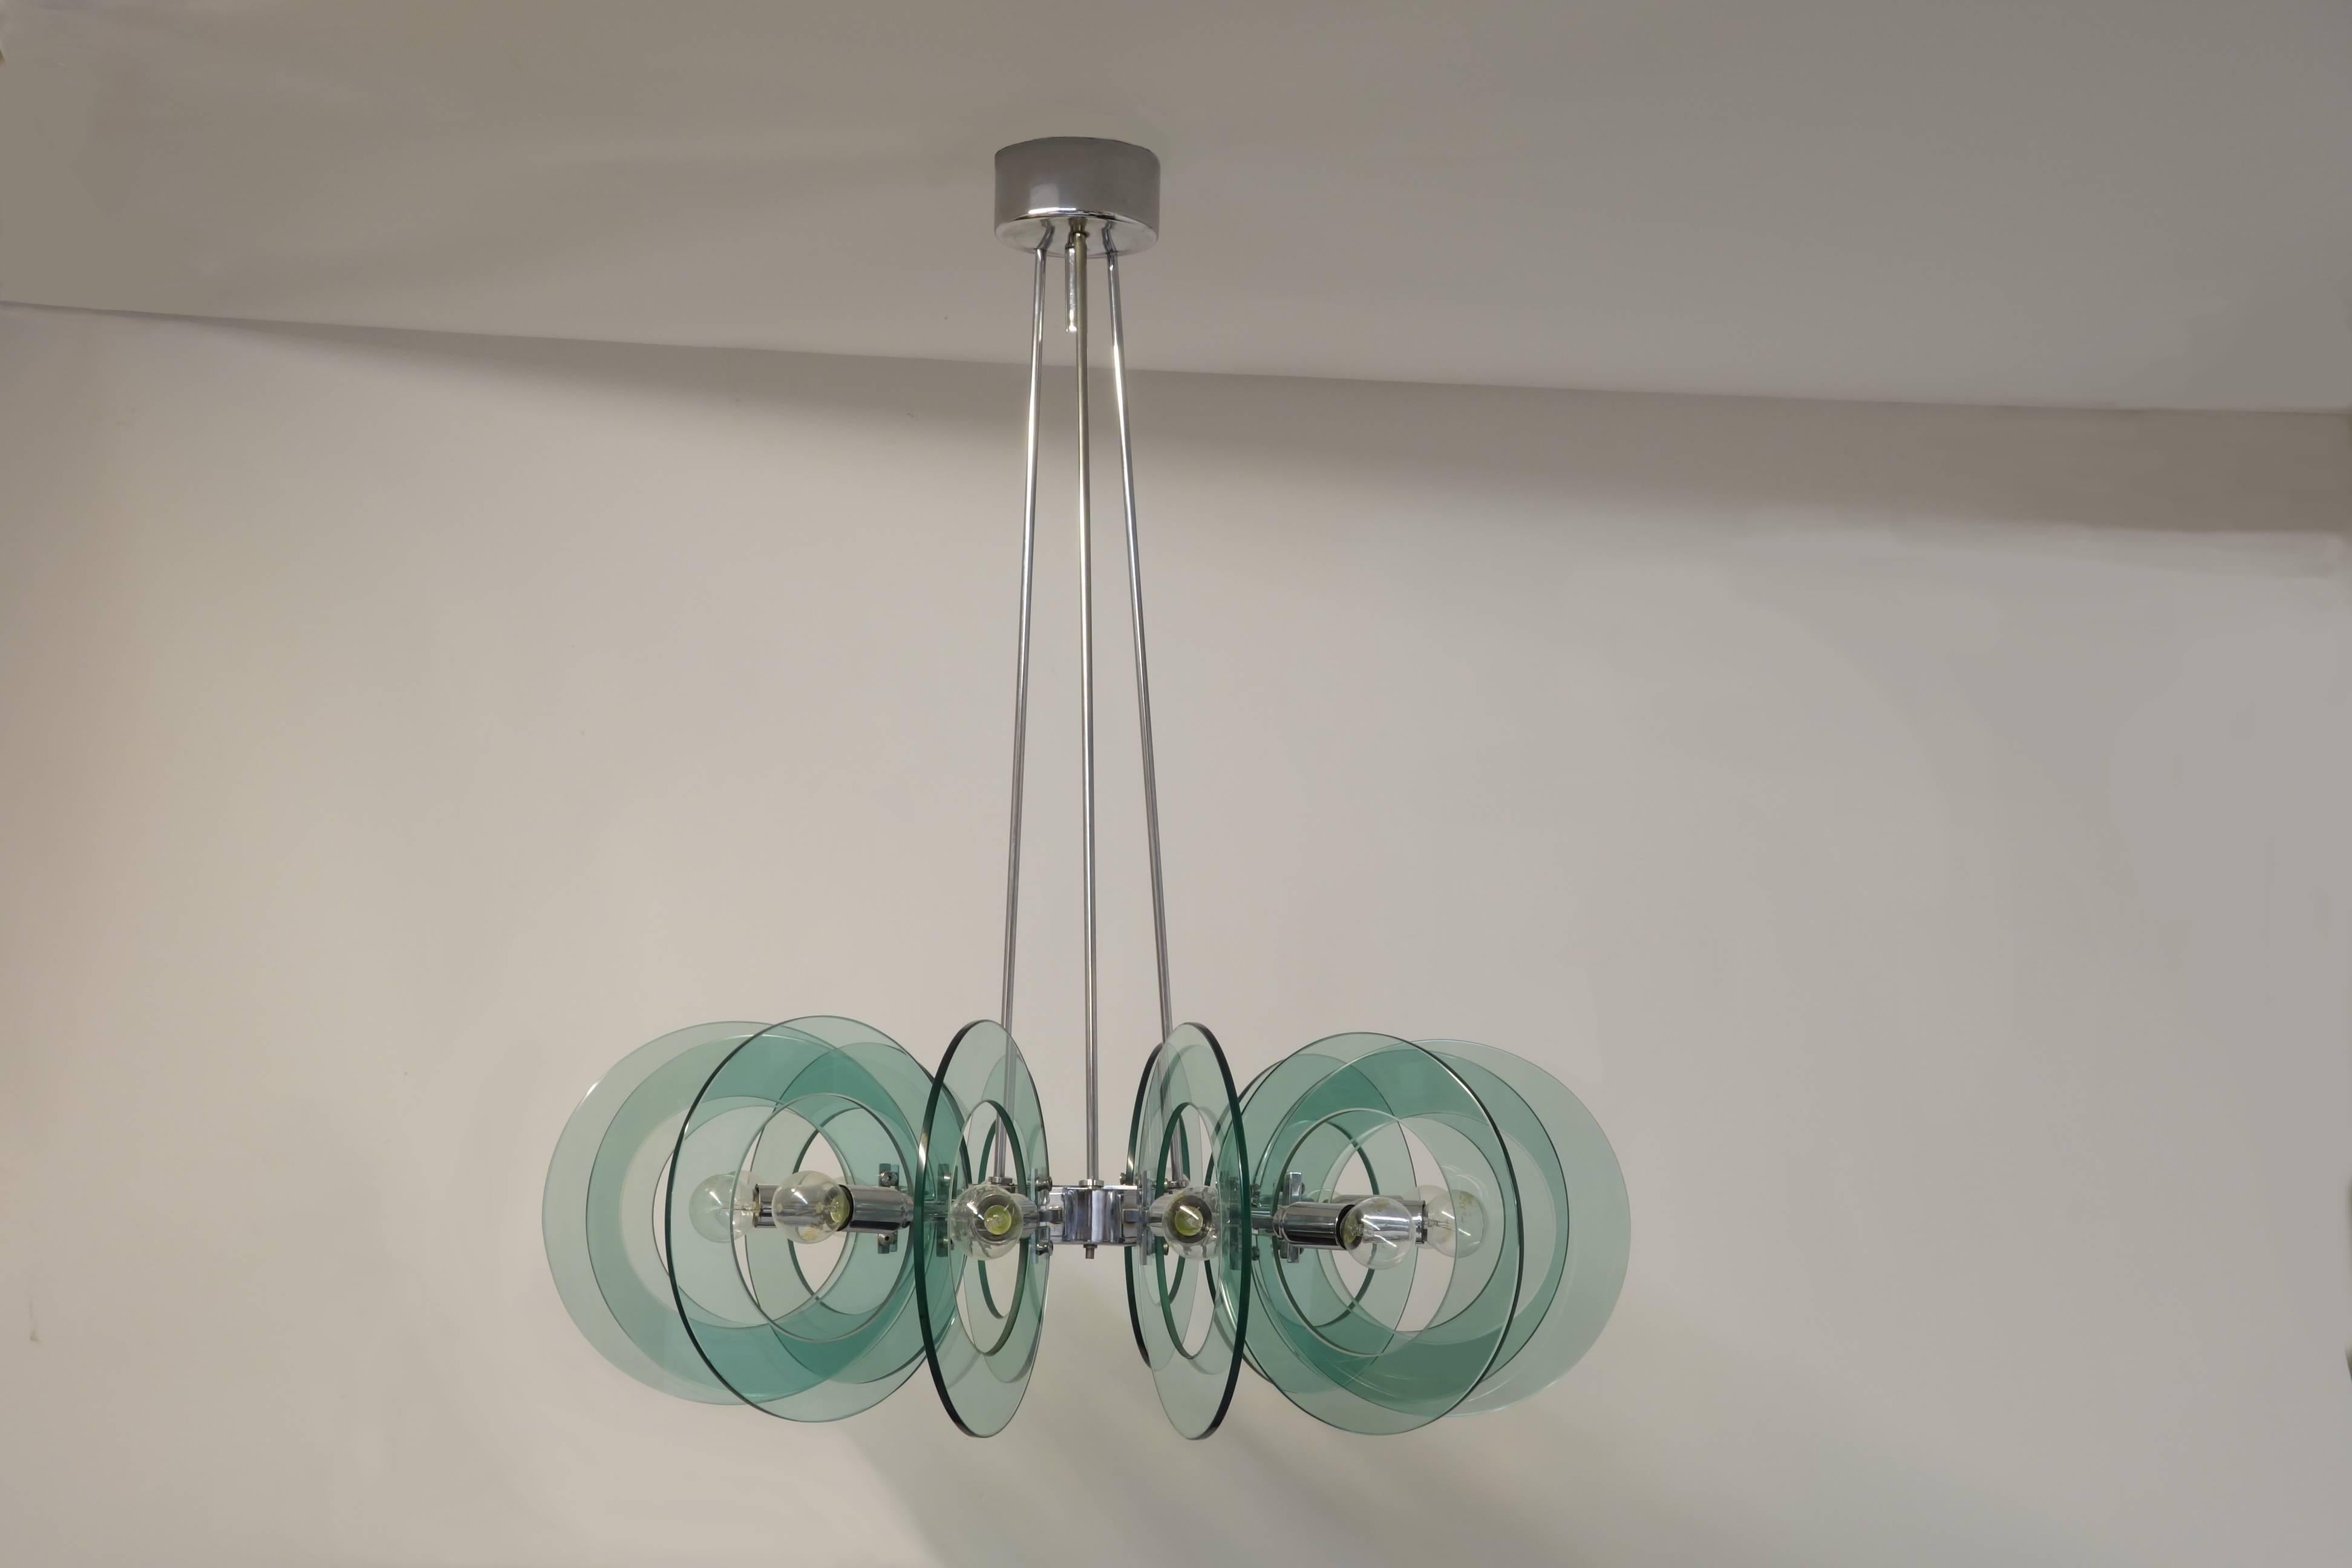 Stunning Fontana Arte chandelier equipped with its delicately Green/Blue shimmering glass discs mounted on a chromium frame including 12 bulb fittings. This very special object represents the understated elegance and style of Fontana Arte in an